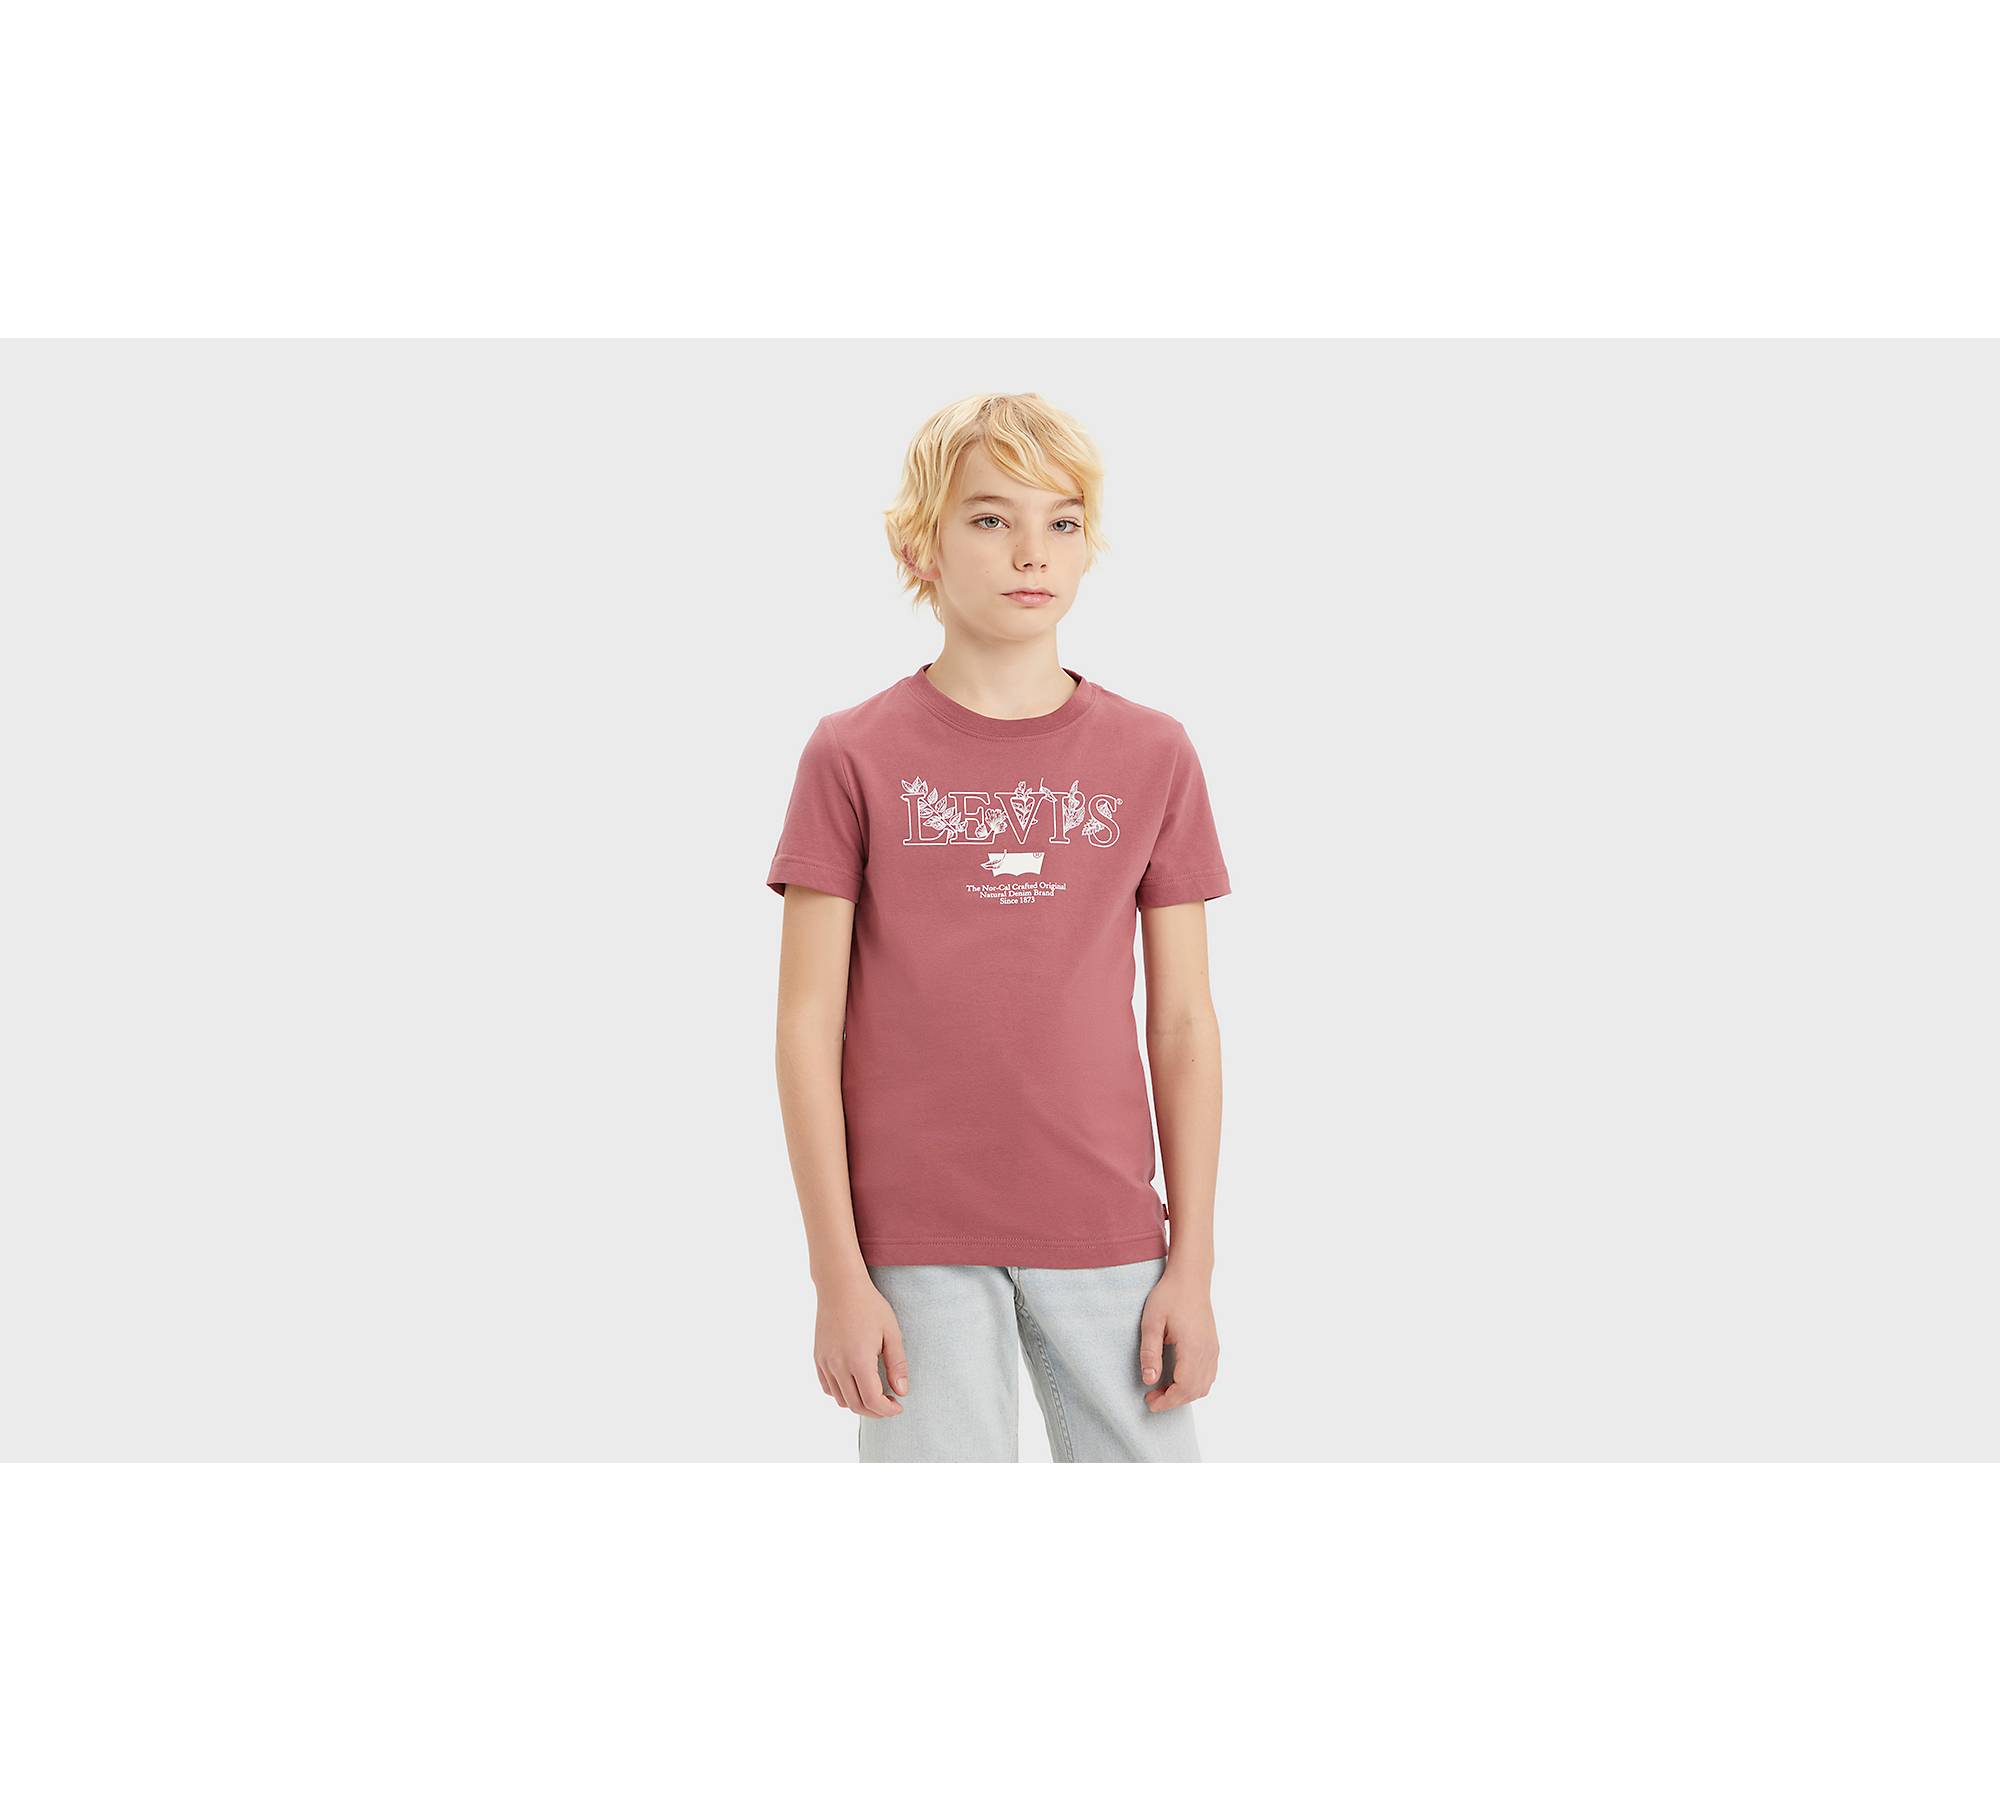 Teenager All Natural Levi's T-Shirt 1